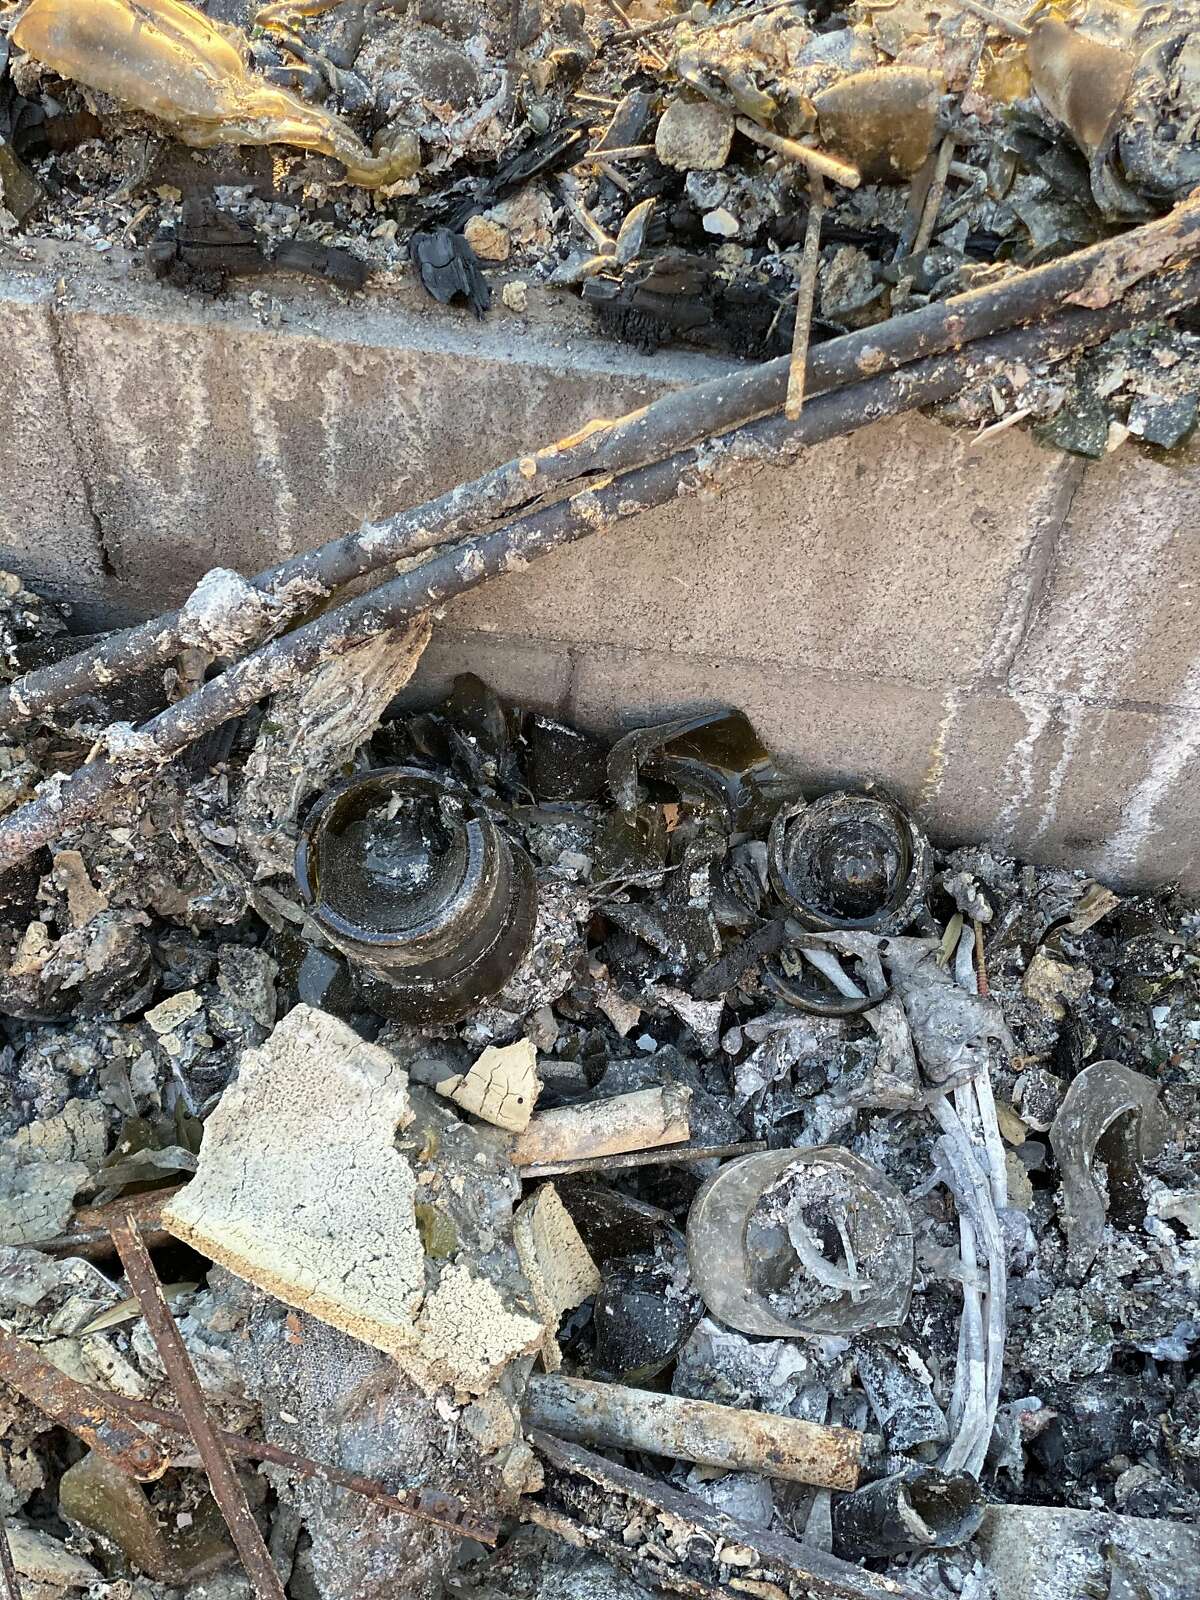 Wine bottles are visible in the wreckage from wine writer Jess Lander's home in Napa, which was destroyed by the Glass Fire.